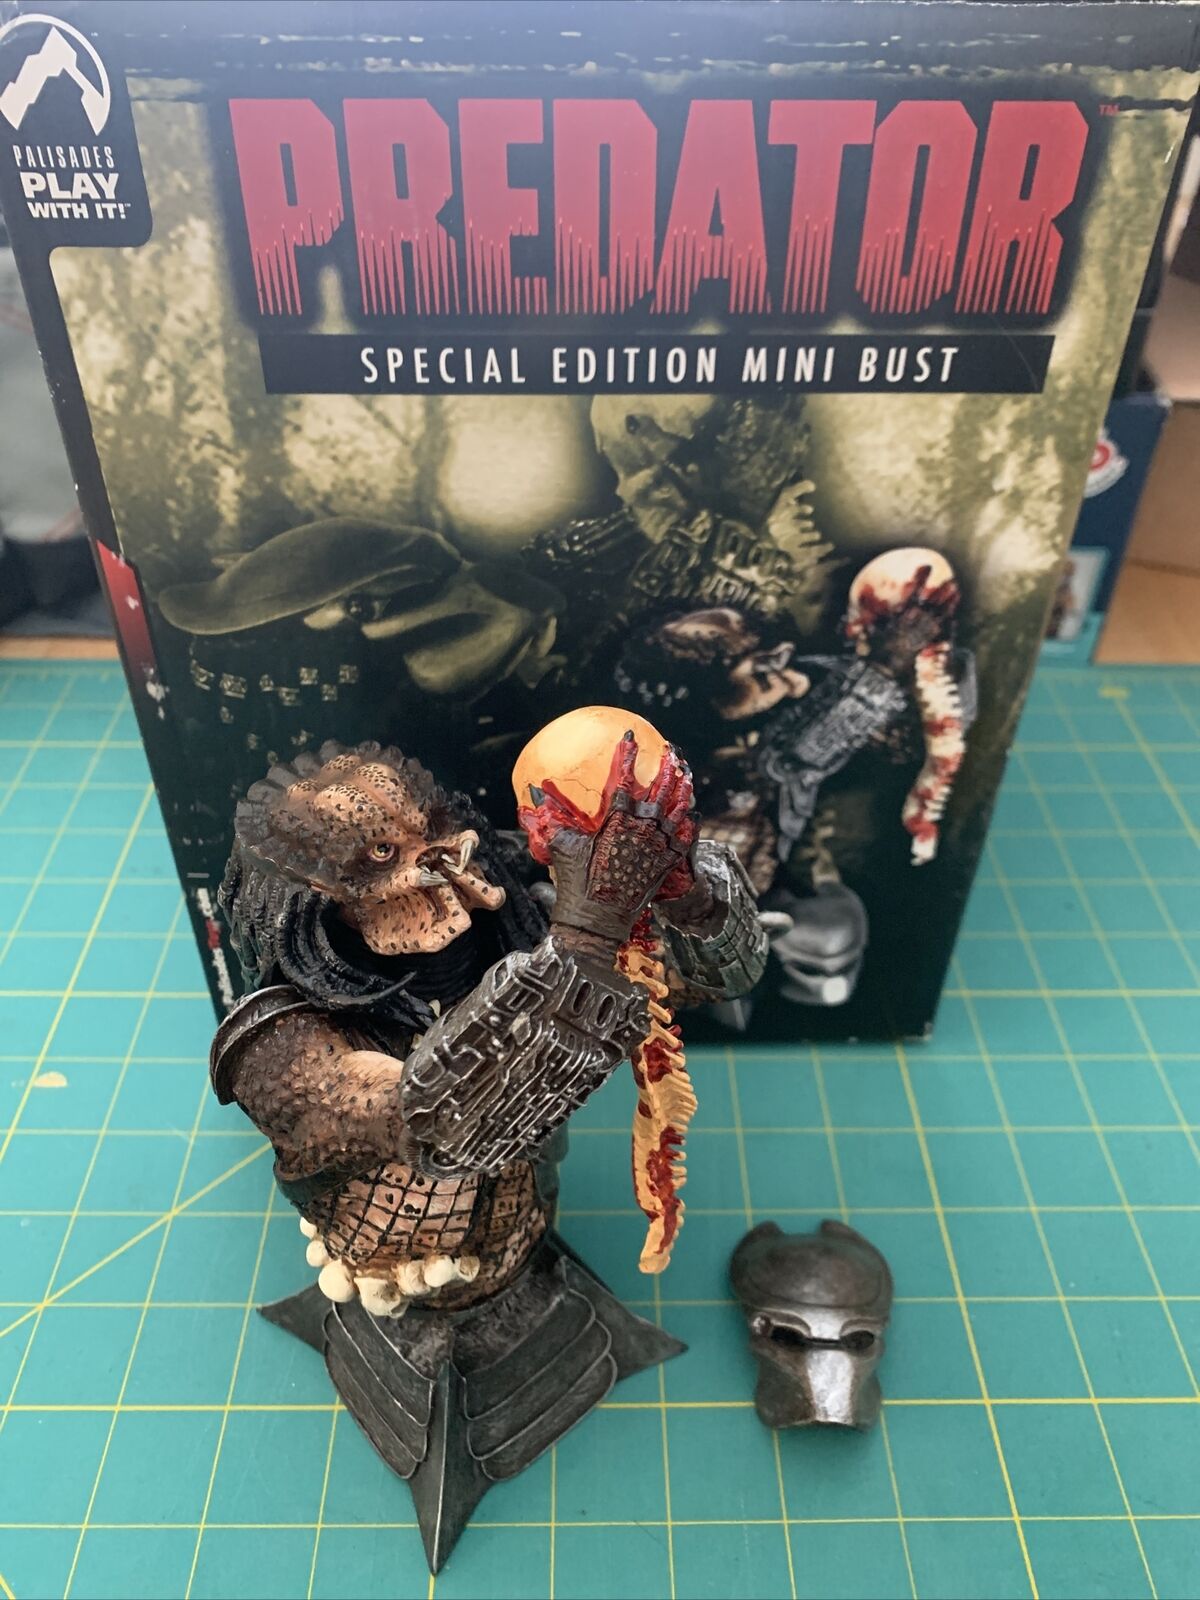 2005 Predator Special Edition Mini Bust palisades toys limited edition of 3000